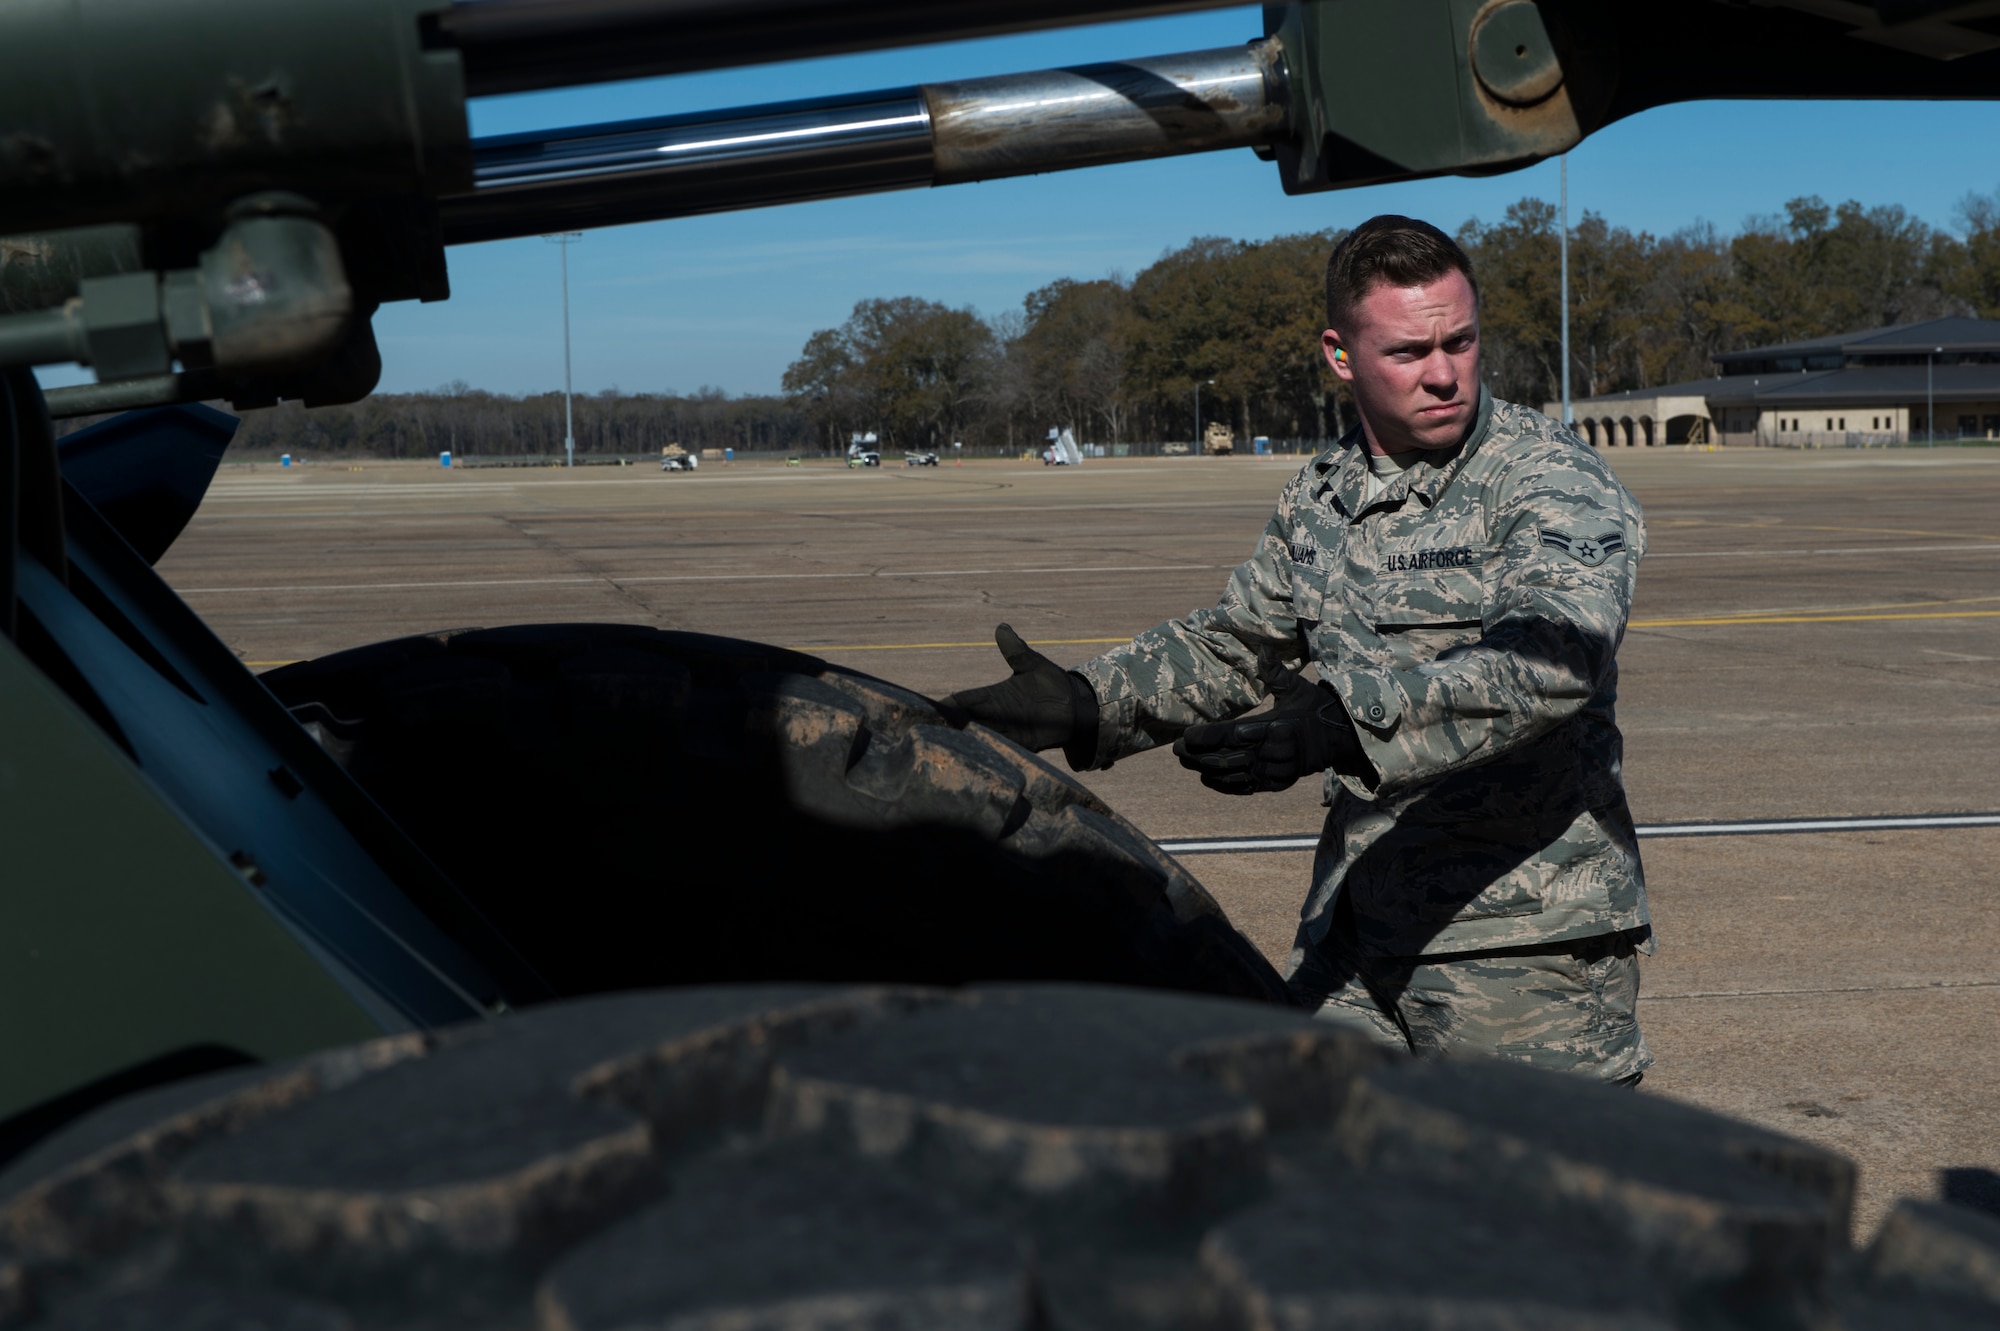 A member of the 571st Contingency Response Group stationed at Travis Air Force Base, Calif., trains during an exercise at the Joint Readiness Training Center at Fort Polk, La., Jan. 19, 2015. JRTC is a 34th Combat Training Squadron exercise for the U.S. Army that improves unit readiness by providing realistic, stressful, joint and combined arms training across the full spectrum of conflict. The Airmen helped support the exercise, and also provided an opportunity for internal training. (U.S. Air Force photo/Staff Sgt. Gustavo Gonzalez/RELEASED)